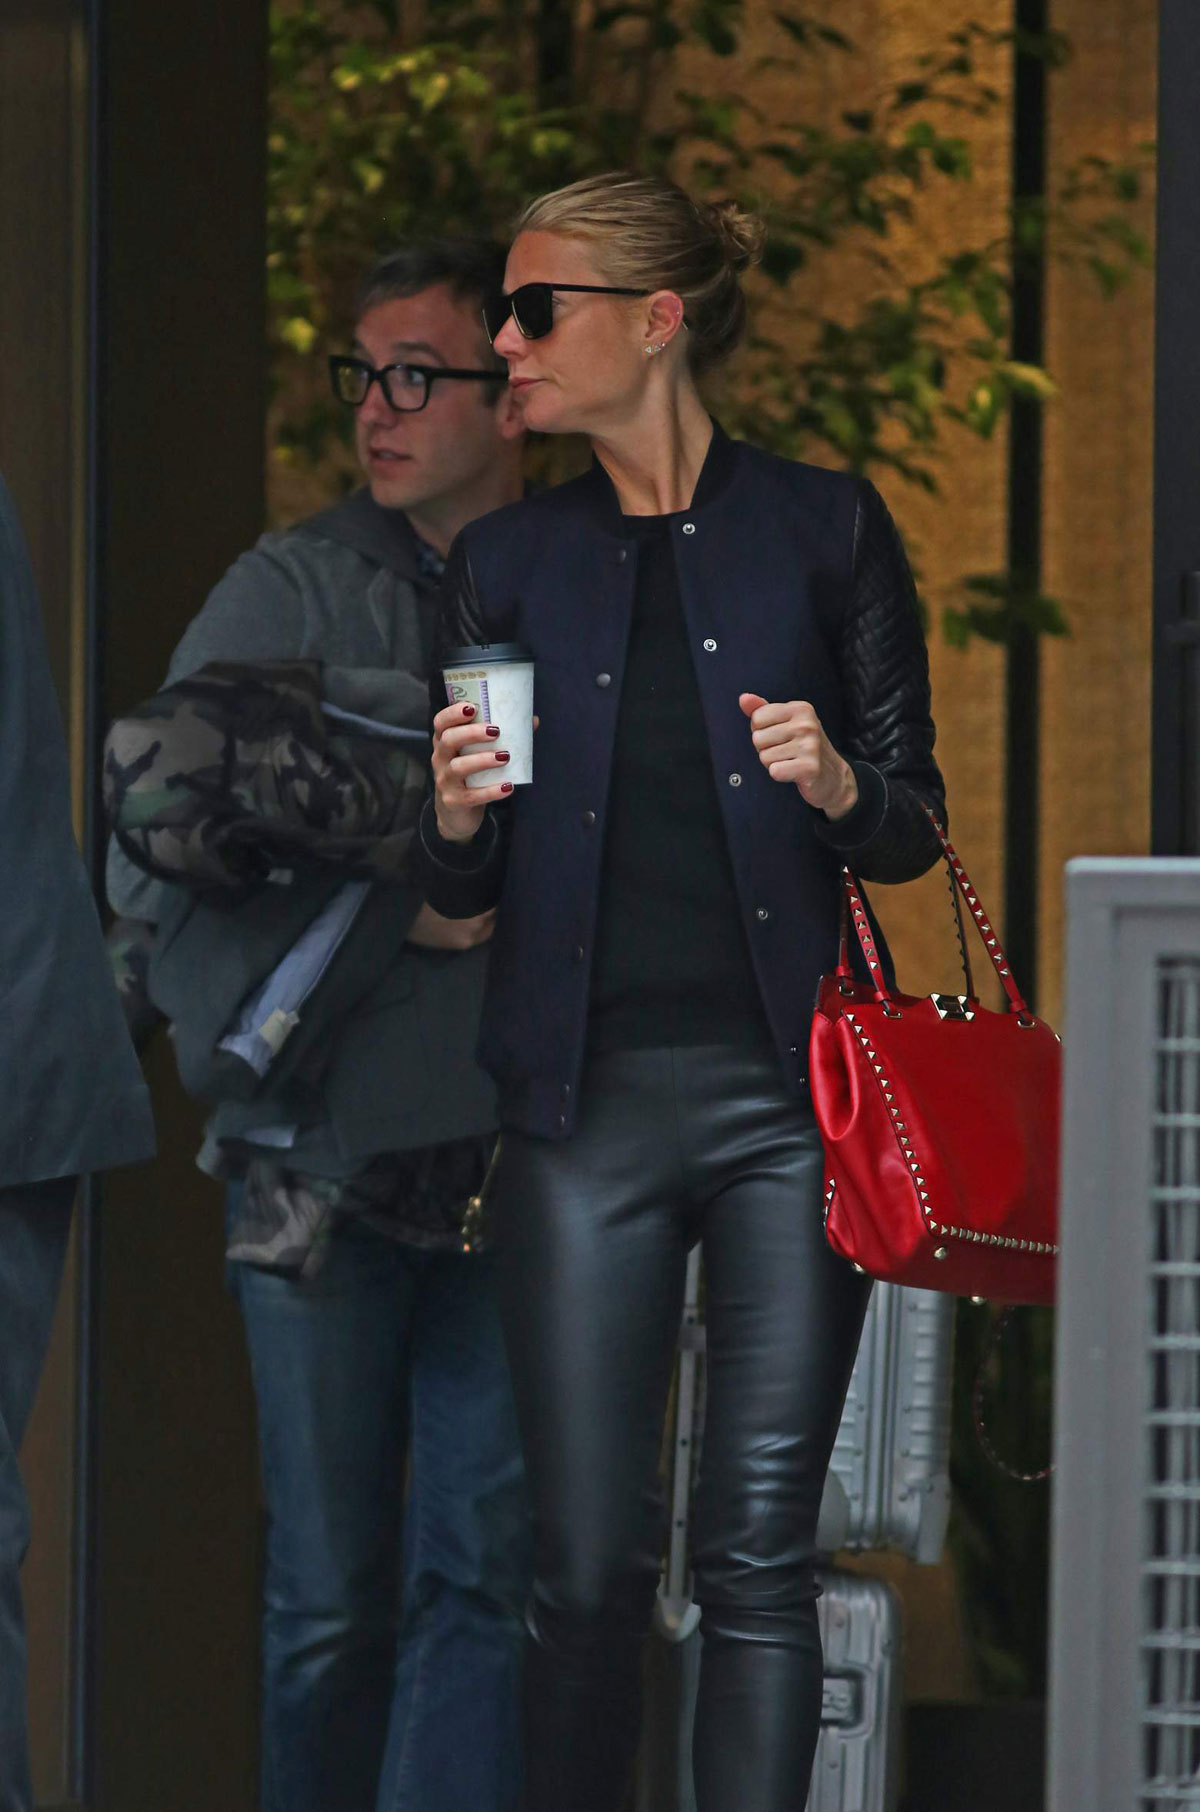 Gwyneth Paltrow out and about in NYC